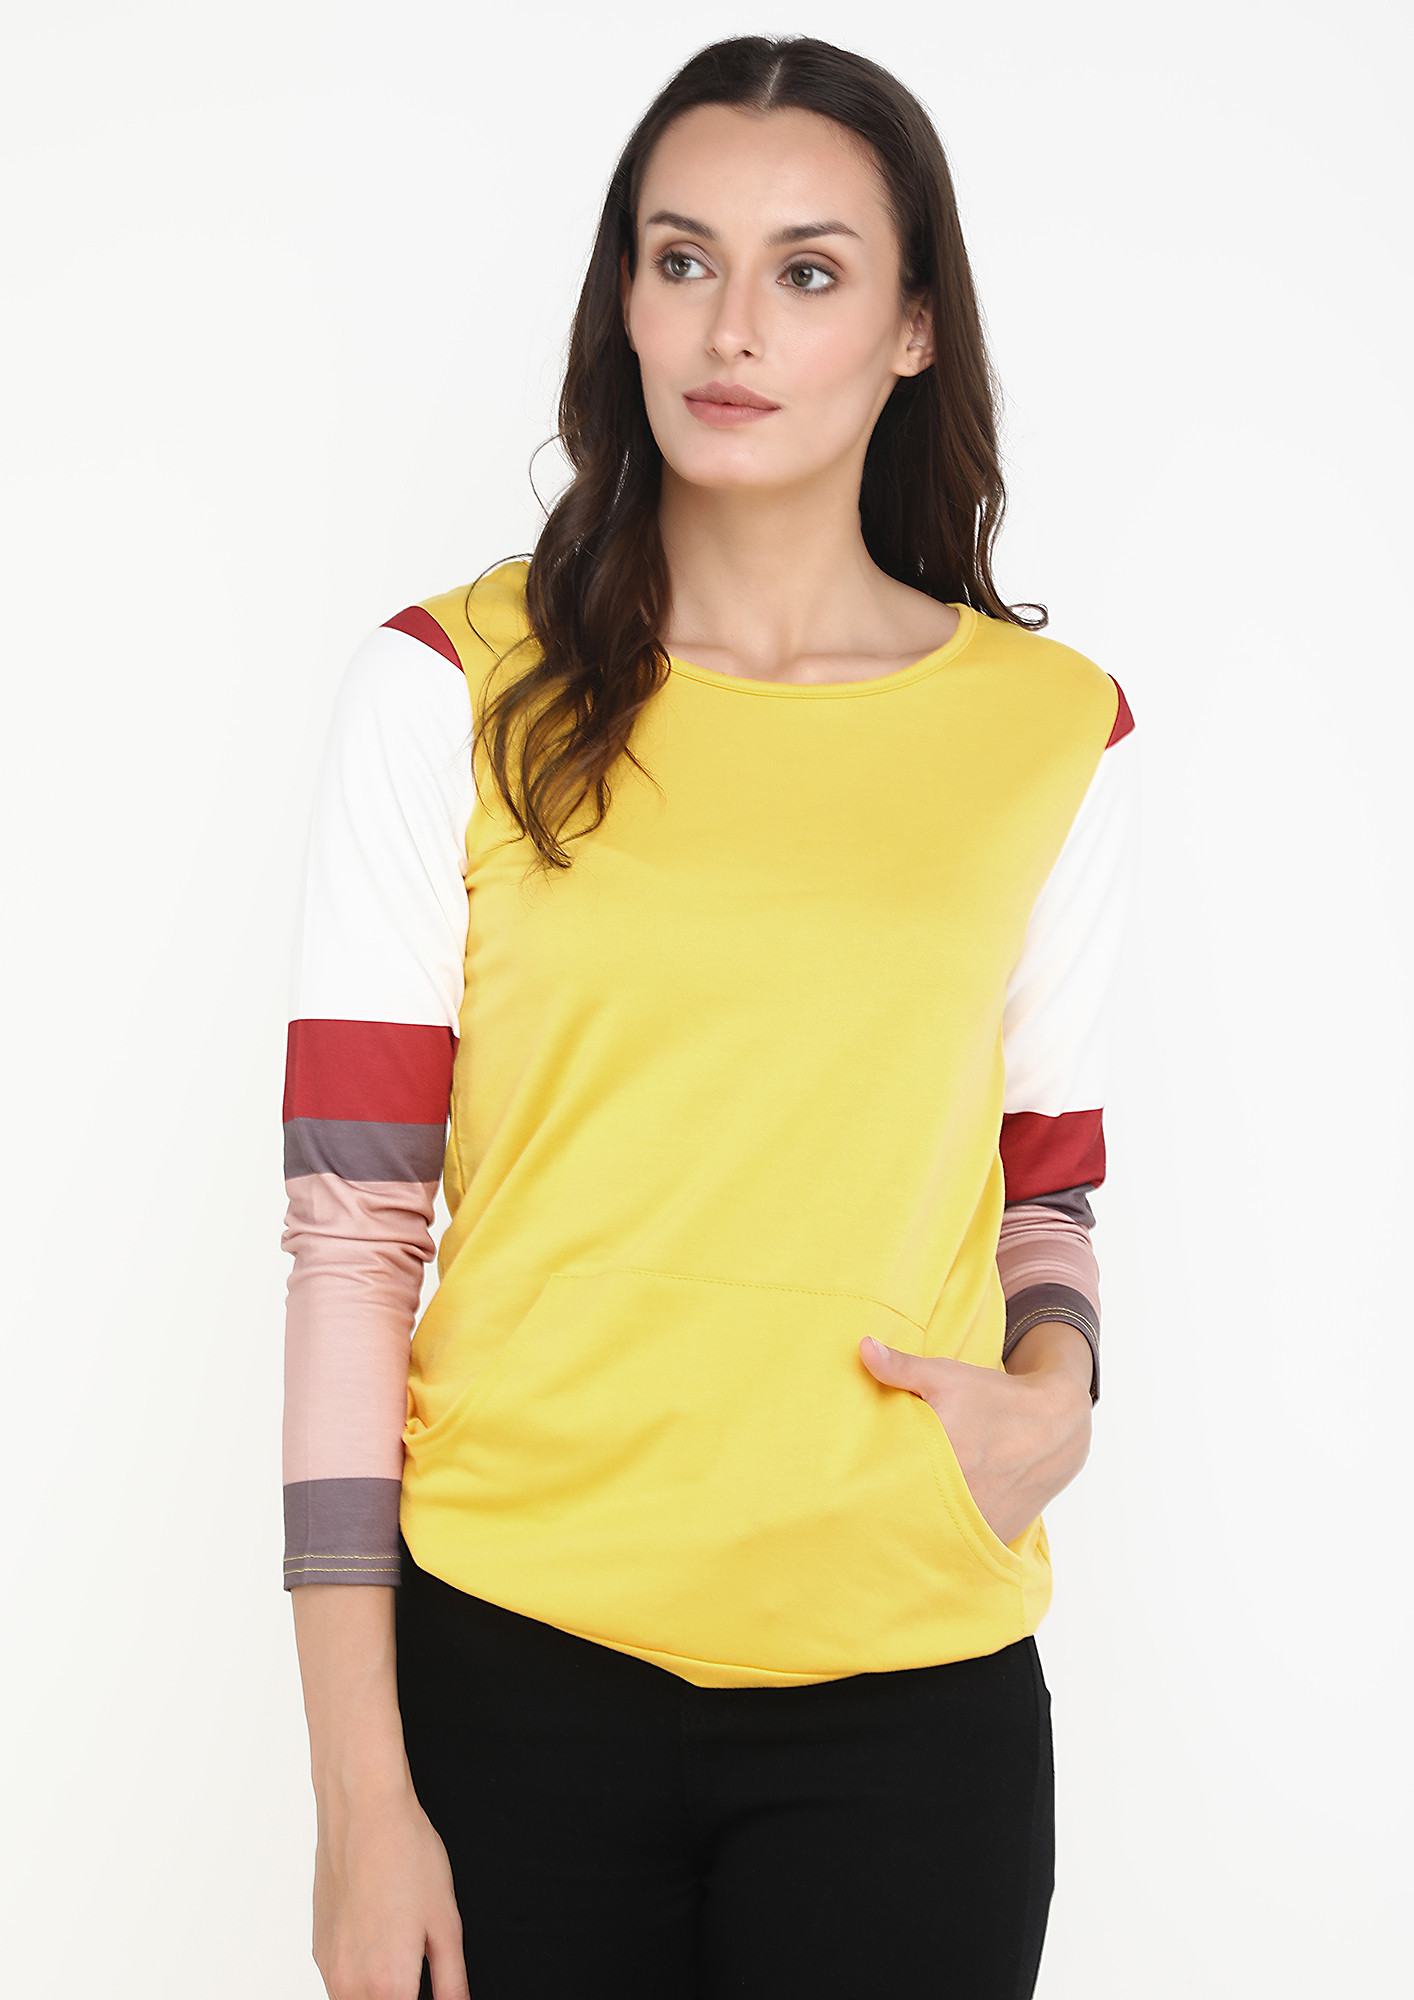 A BAR OF FRESHNESS YELLOW TOP